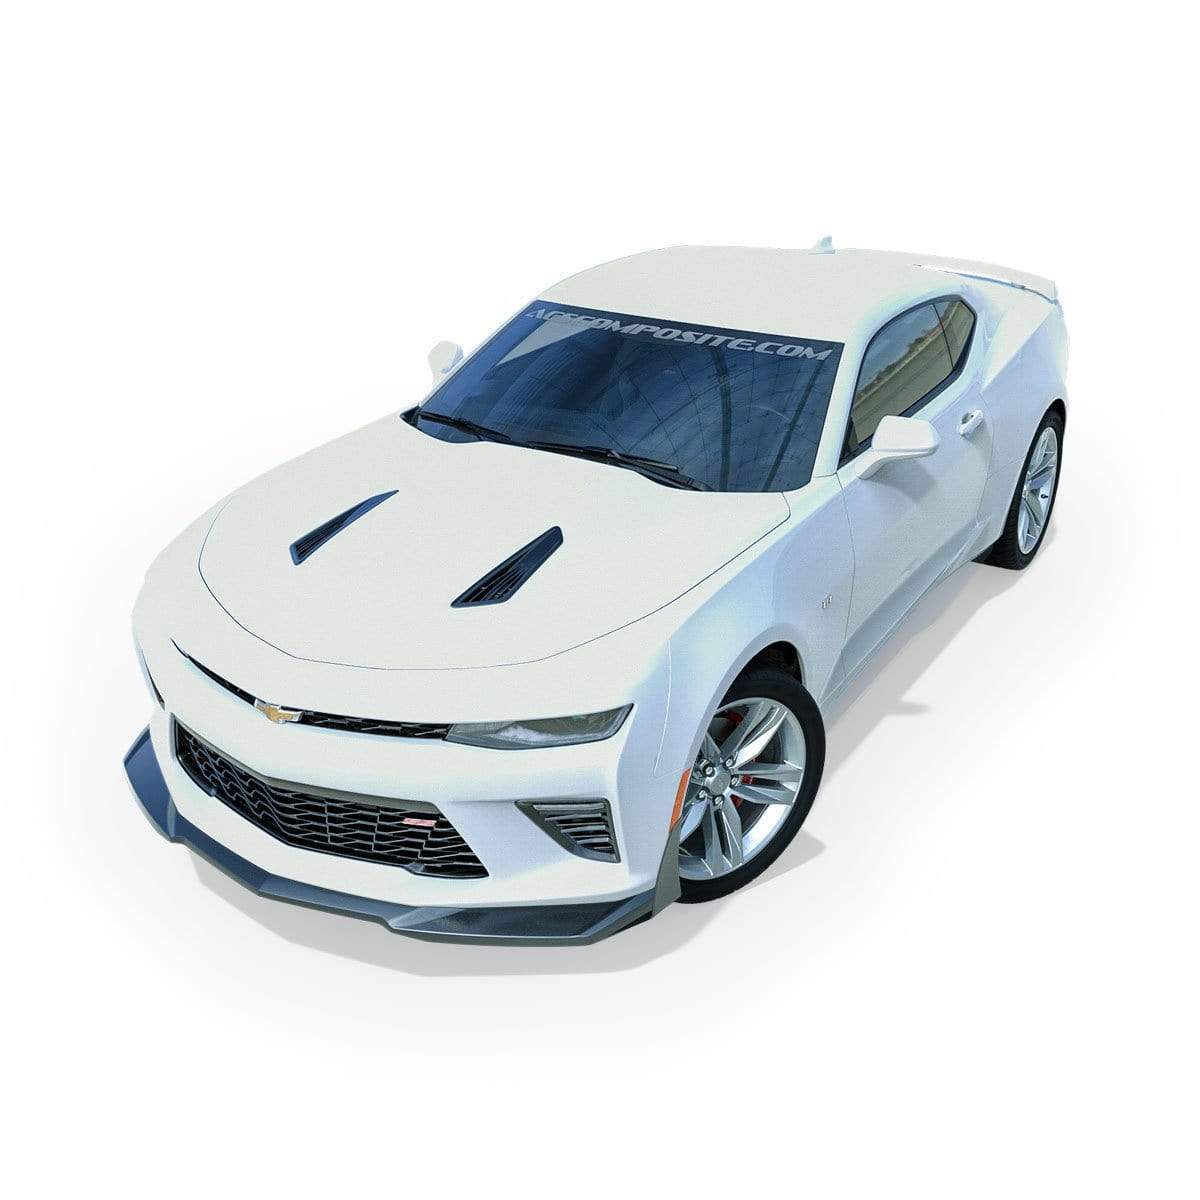 ACS Stage 3 Deflectors for Camaro SS, SKU 48-4-035, designed for improved aerodynamics and cooling, matches ACS ZL1-SS splitter for aggressive style.